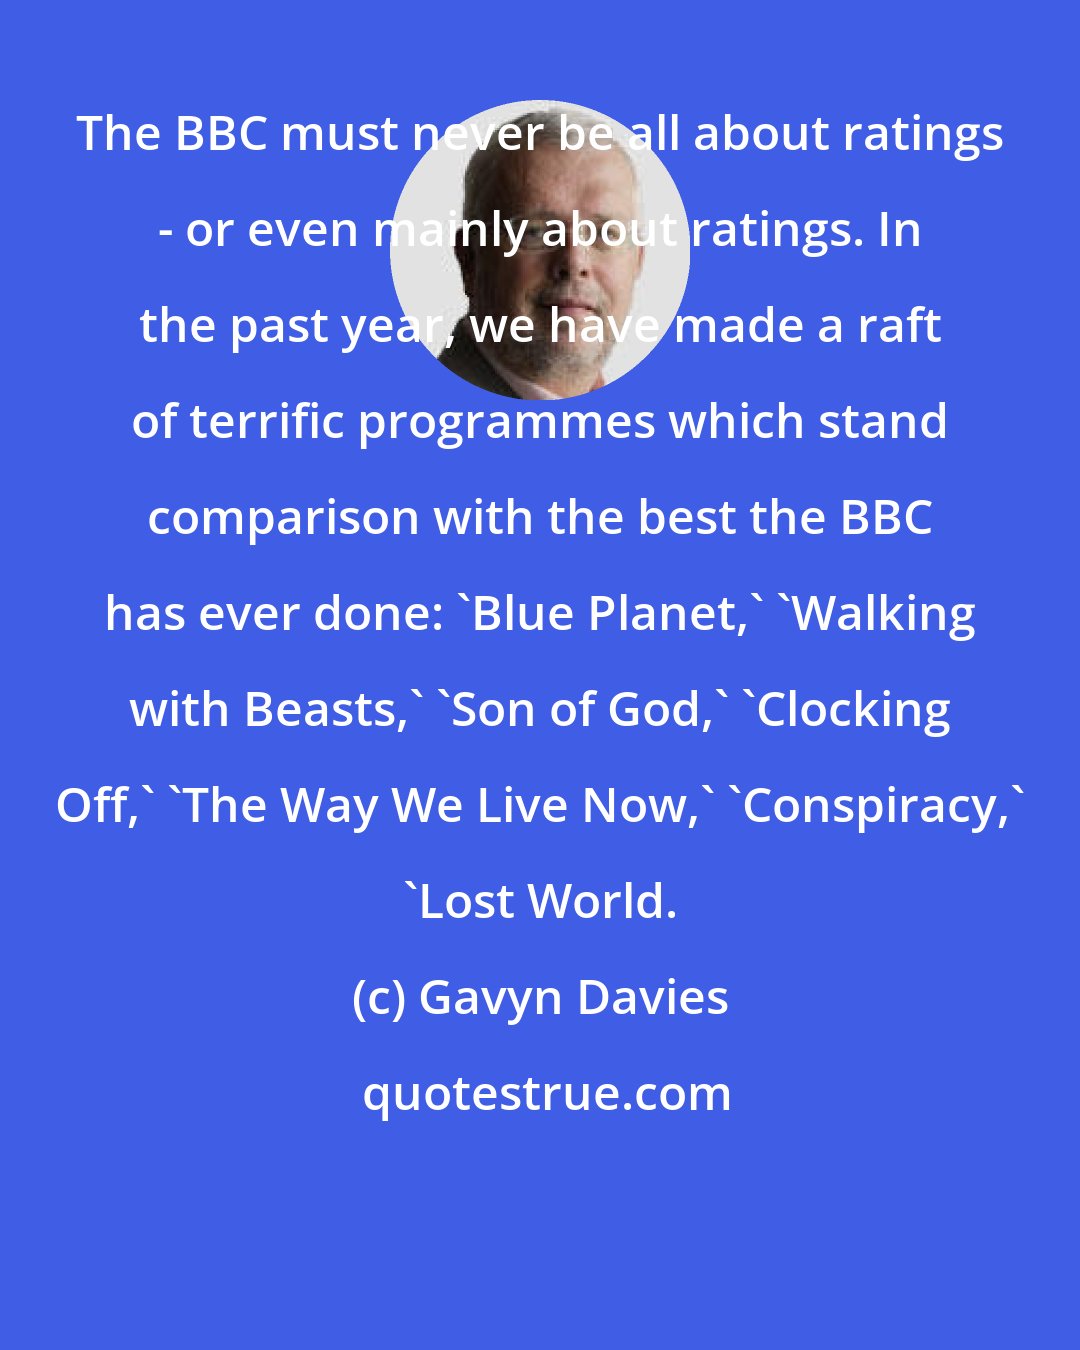 Gavyn Davies: The BBC must never be all about ratings - or even mainly about ratings. In the past year, we have made a raft of terrific programmes which stand comparison with the best the BBC has ever done: 'Blue Planet,' 'Walking with Beasts,' 'Son of God,' 'Clocking Off,' 'The Way We Live Now,' 'Conspiracy,' 'Lost World.